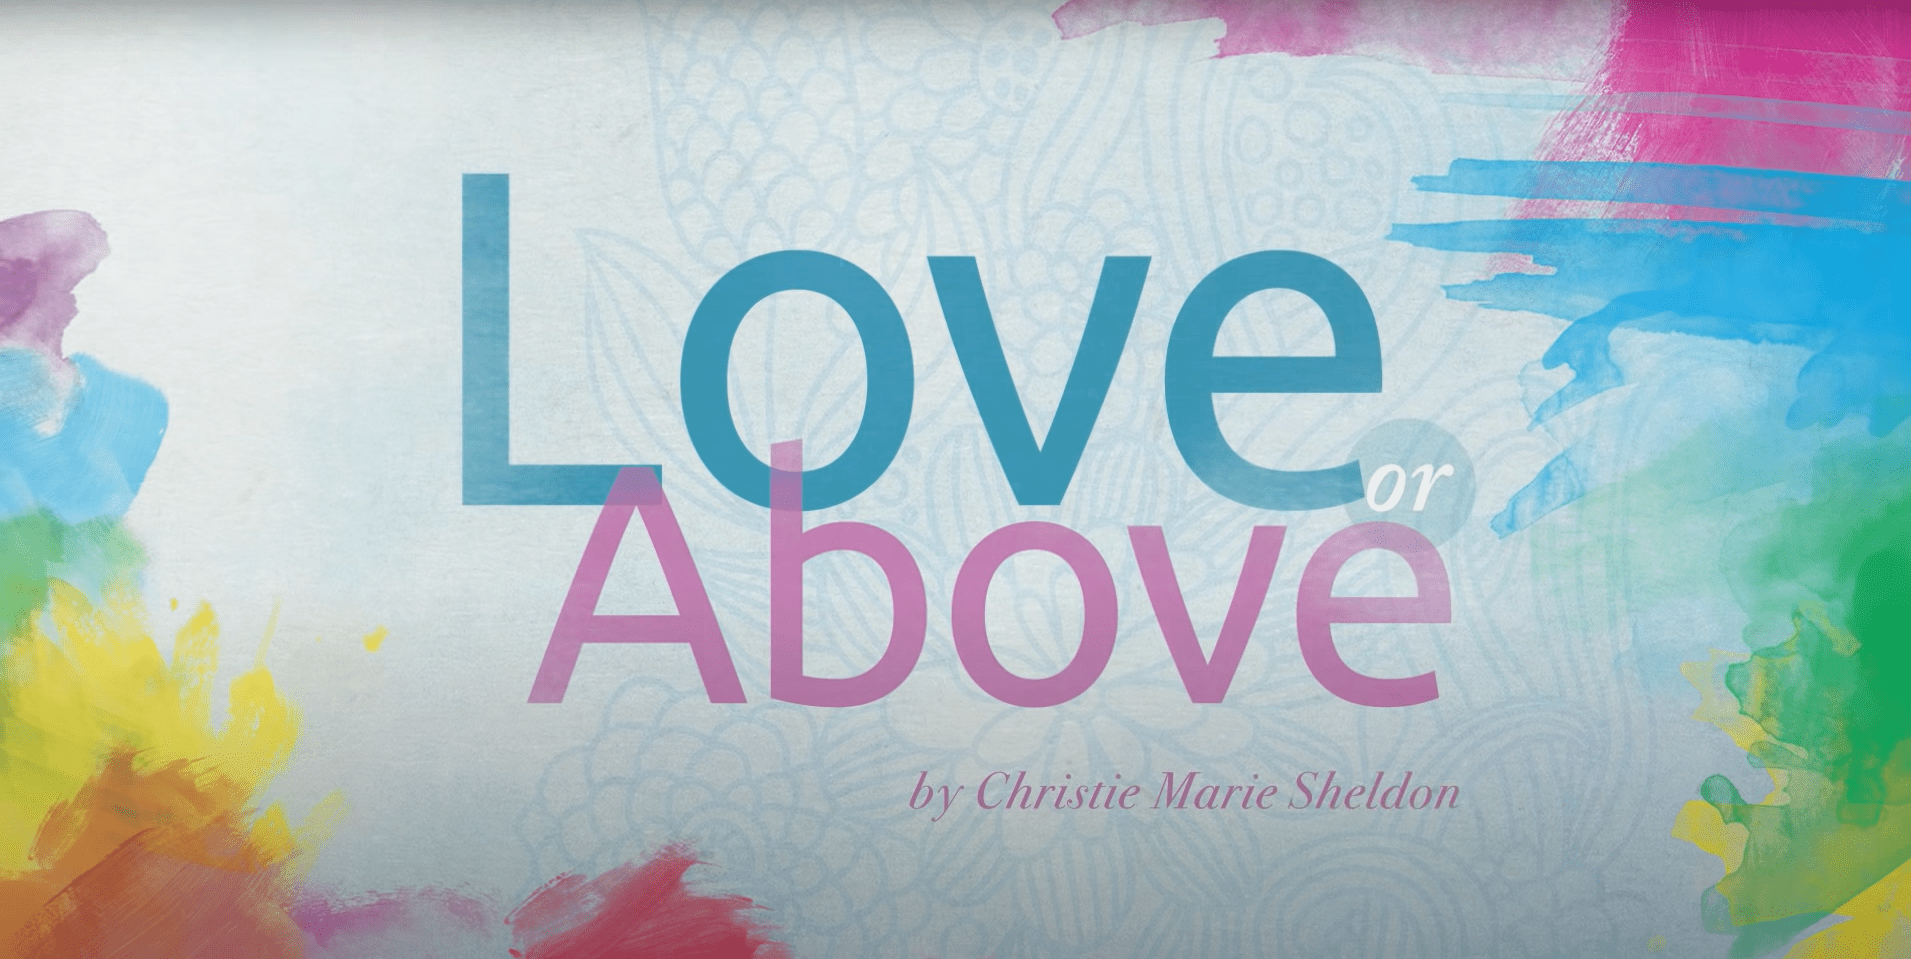 LOVE or ABOVE By Christie Marie Sheldon